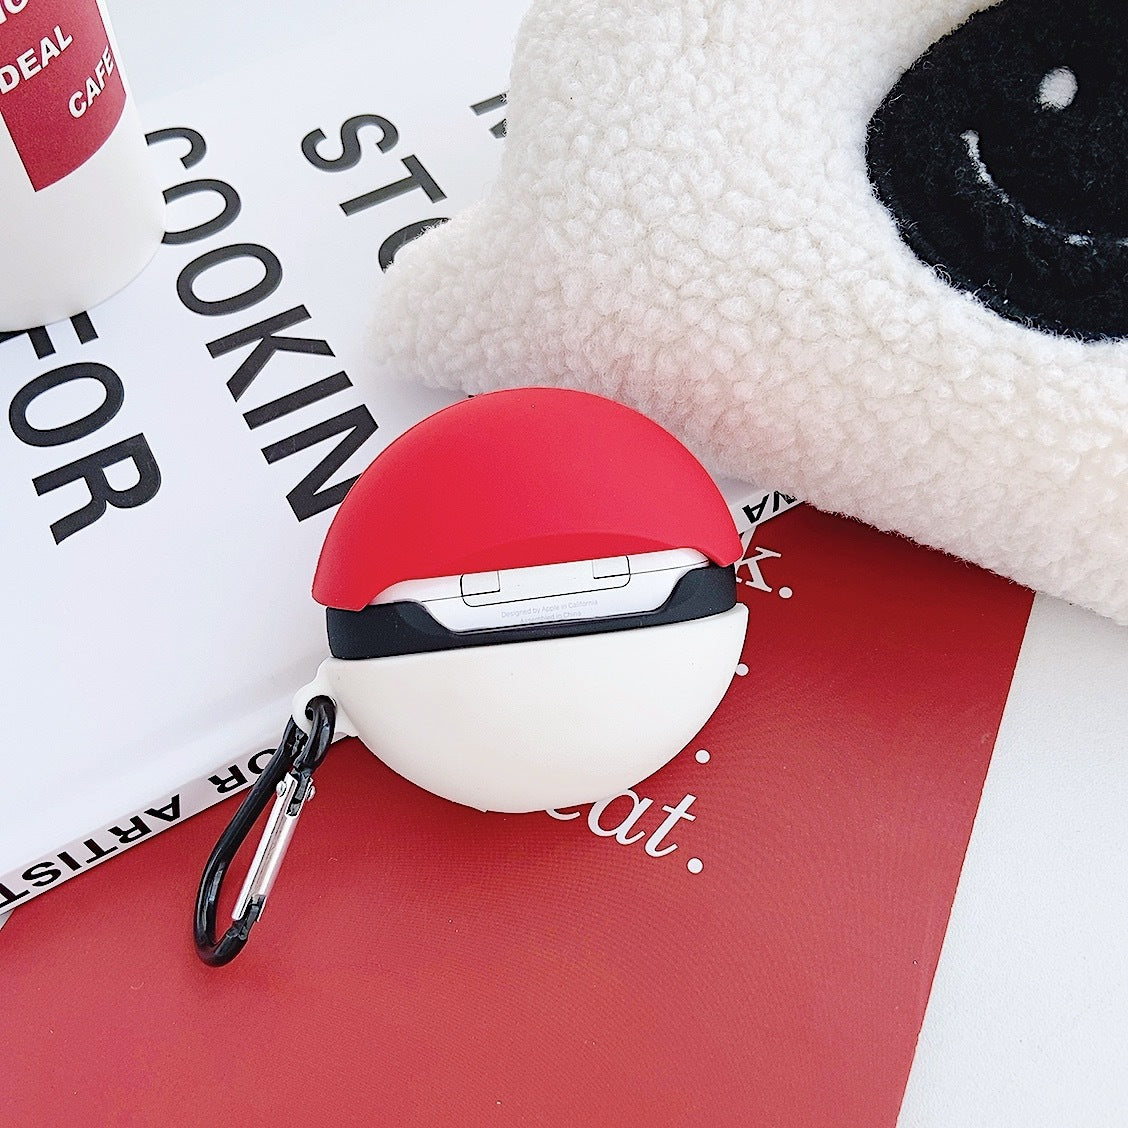 AirPods Case | INSNIC Creative Pokeball